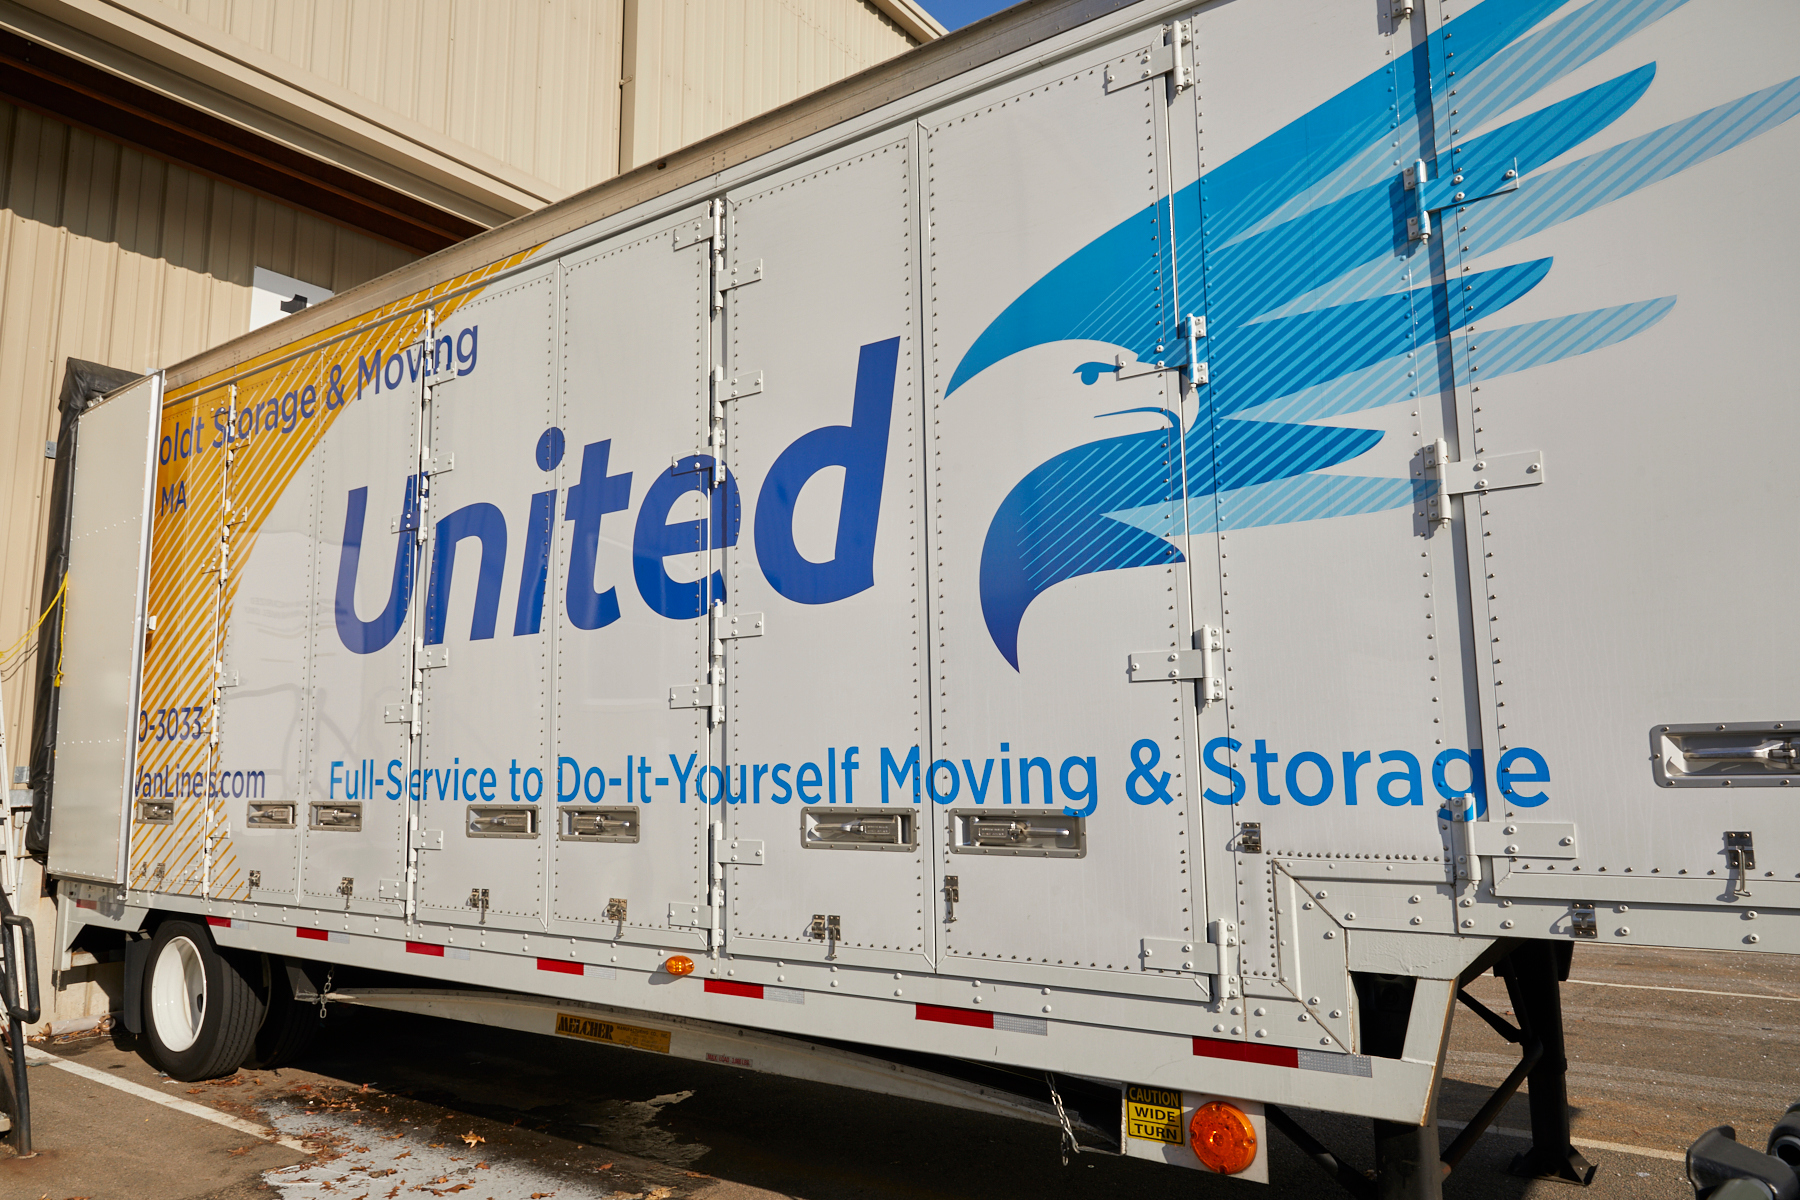 Humboldt Storage and Moving moving truck